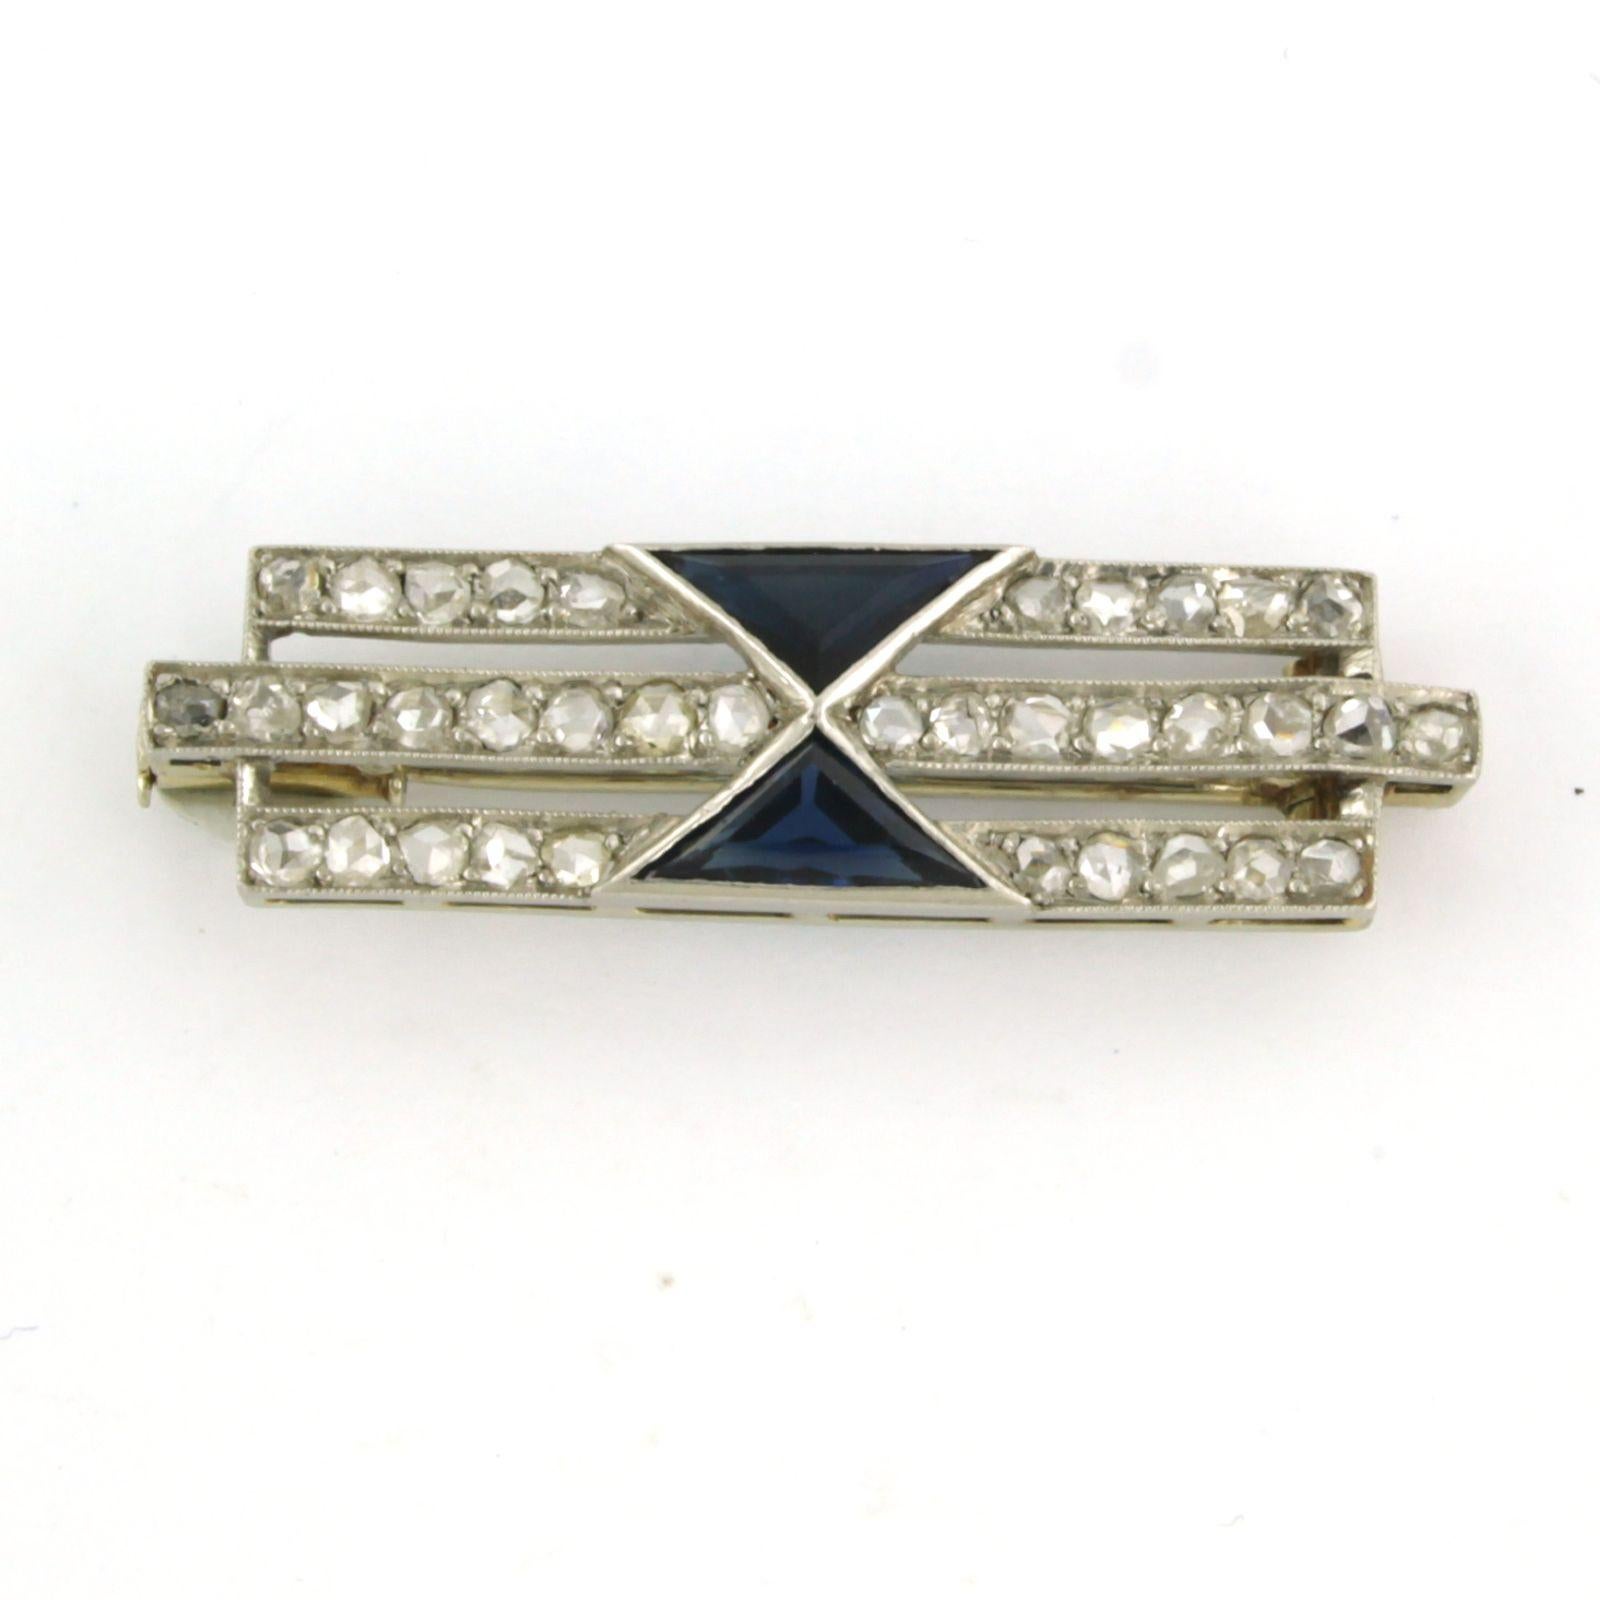 Platina brooch set with sapphire and rose cut diamonds total approx. 0.70 ct G/H - SI/P - 3.9 cm x 1.1 cm

detailed description

The brooch is 3.9 cm wide and 1.1 cm high

weight: 5.2 grams

Set with:

- 2 x 1.0 cm x 4. mm triagle cut